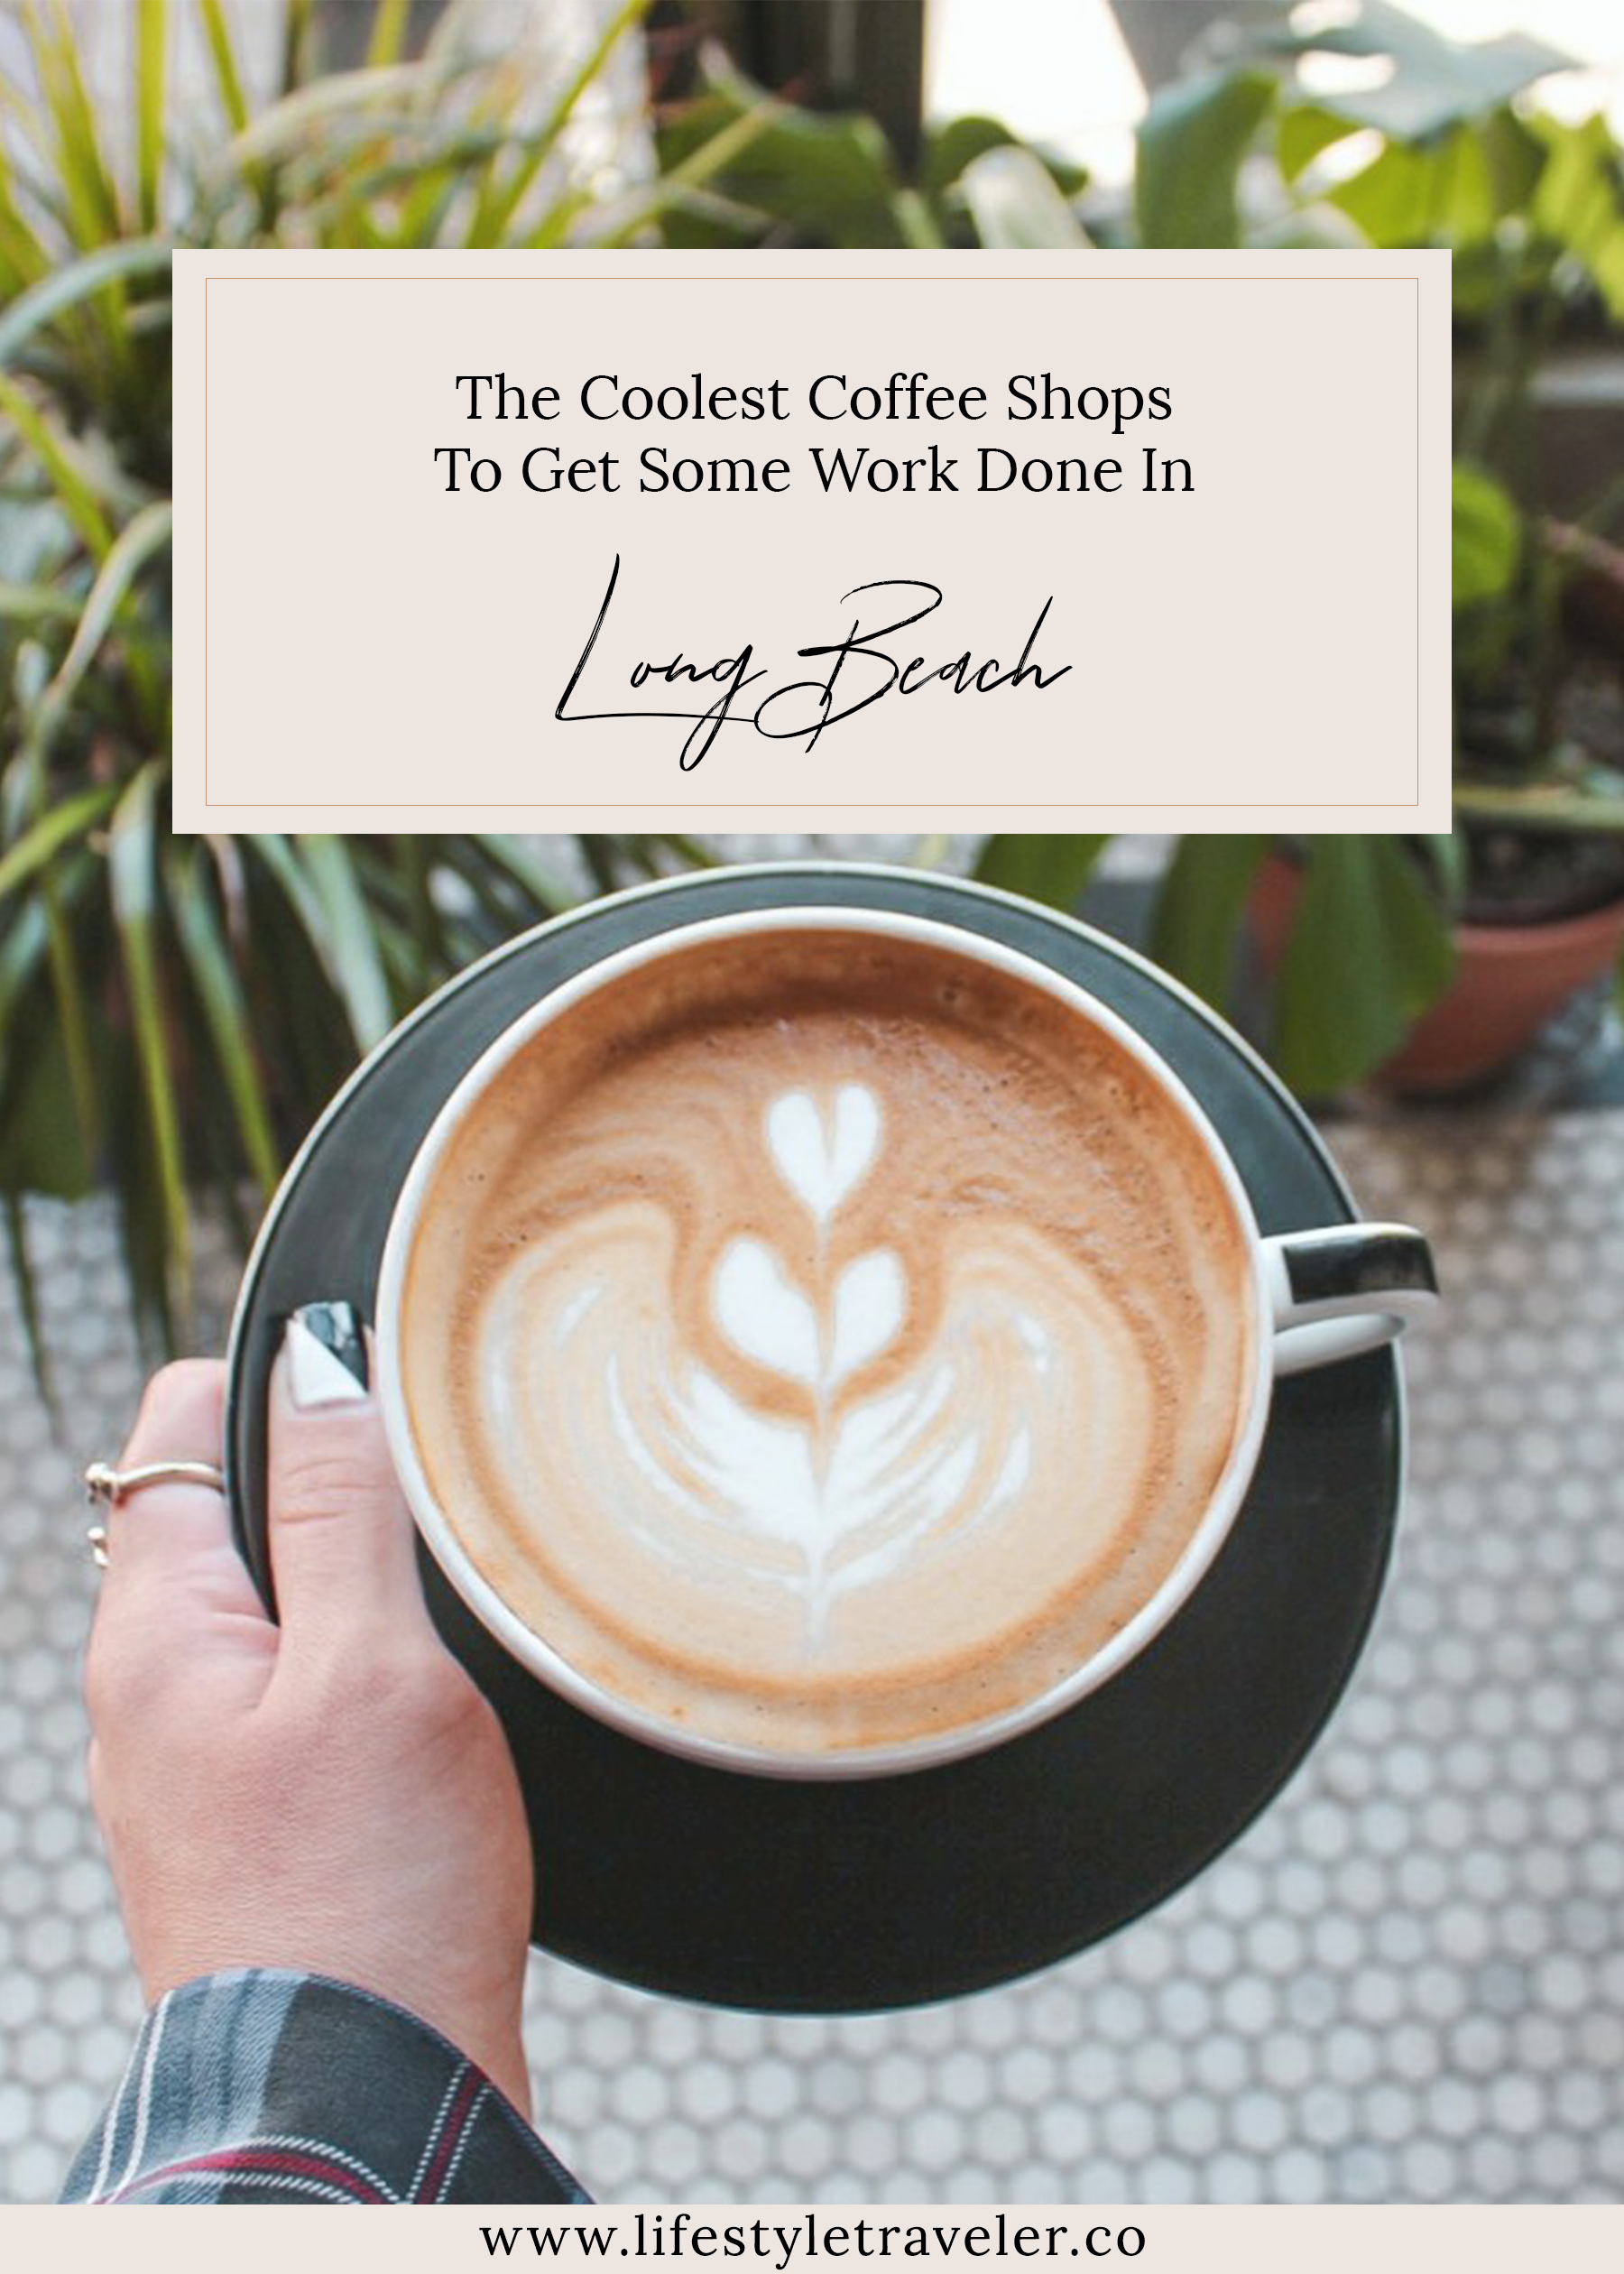 The Coolest Coffee Shops In Long Beach To Get Some Work Done | lifestyletraveler.co | IG: @lifestyletraveler.co